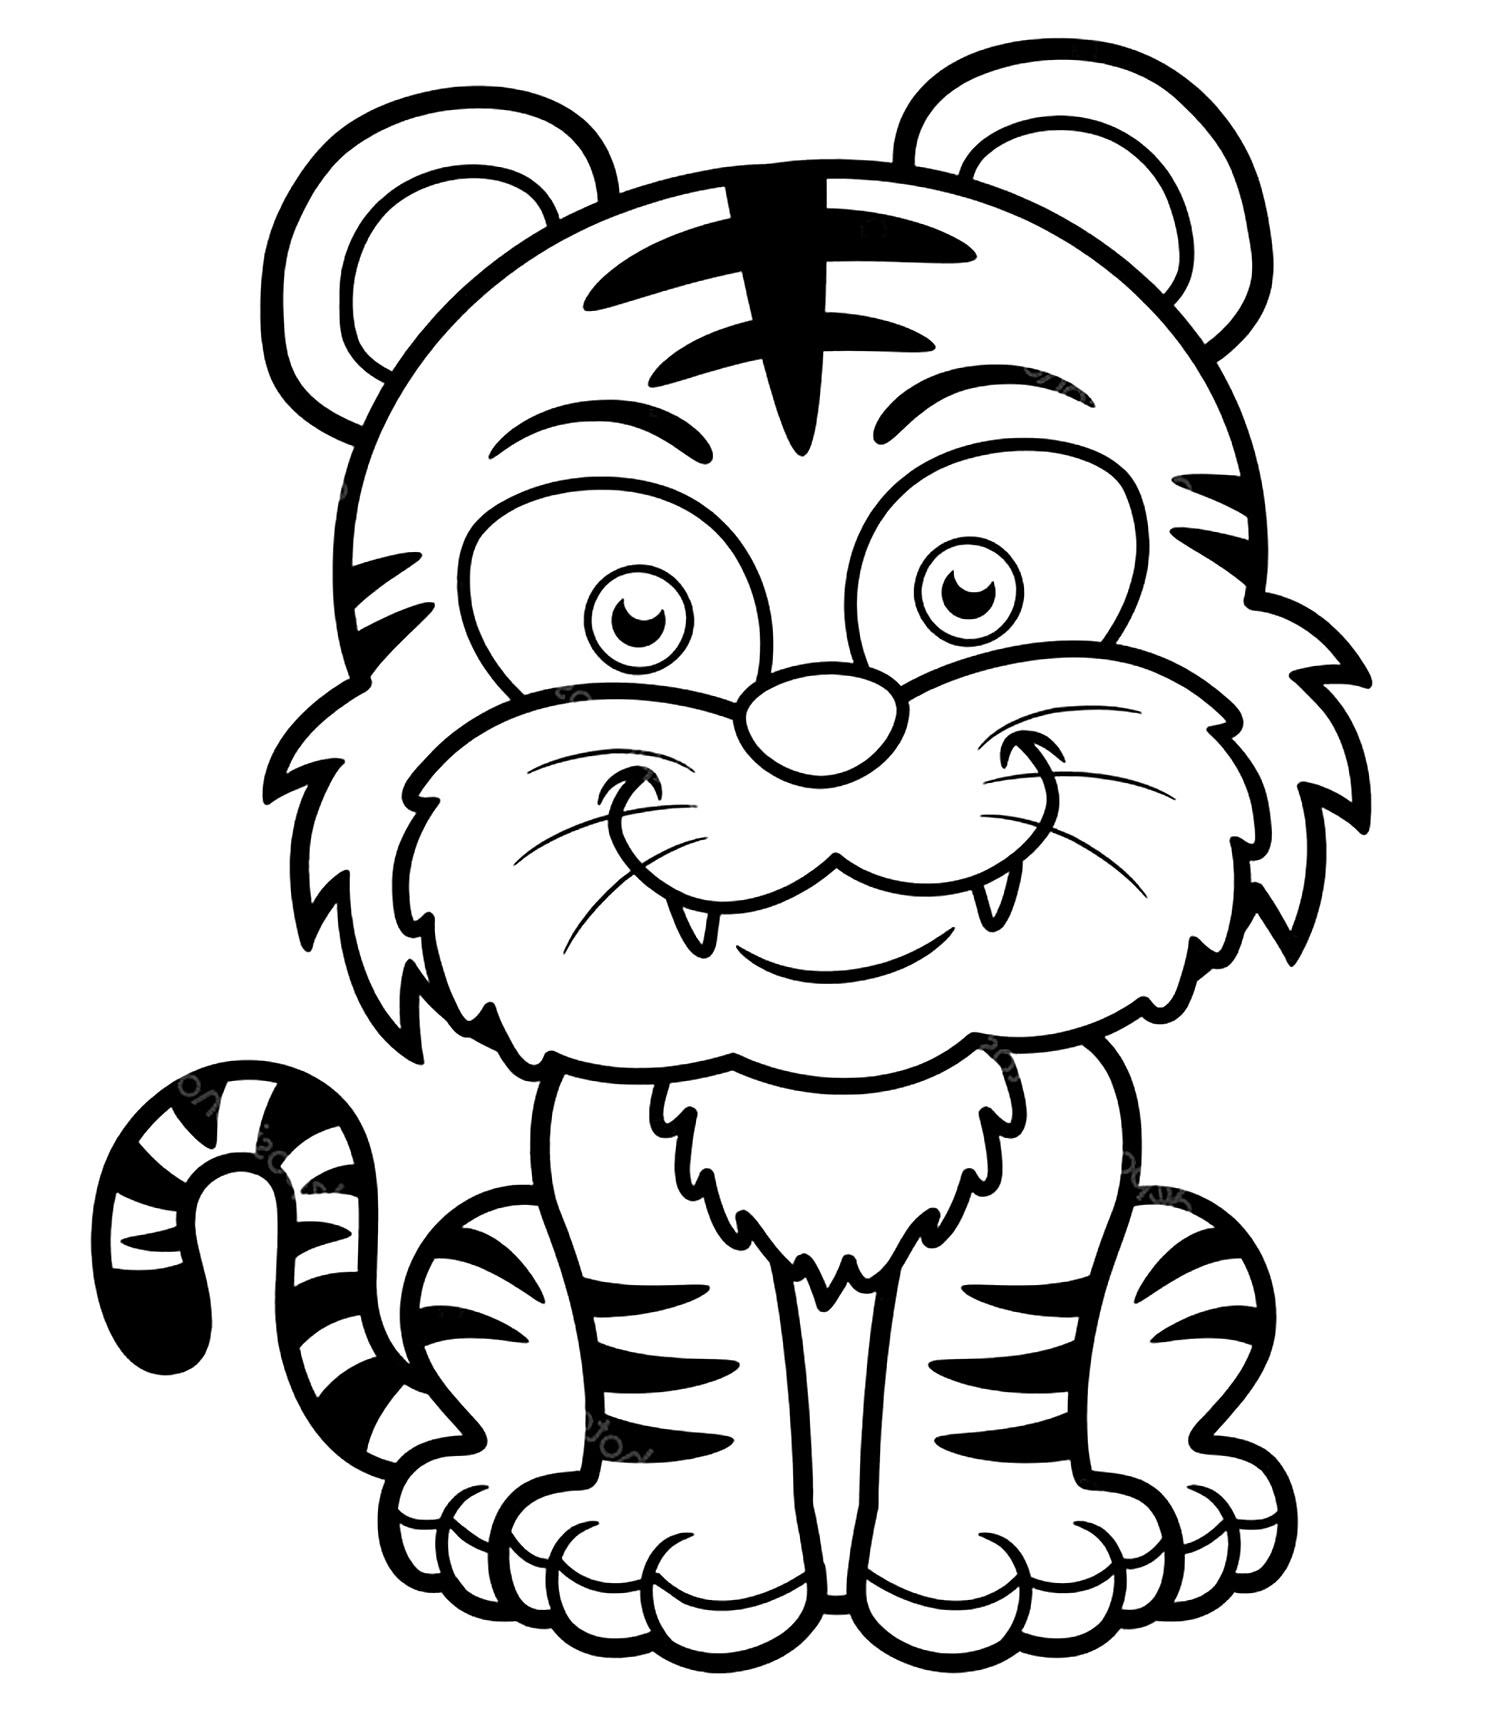 Download Tigers free to color for children - Tigers Kids Coloring Pages